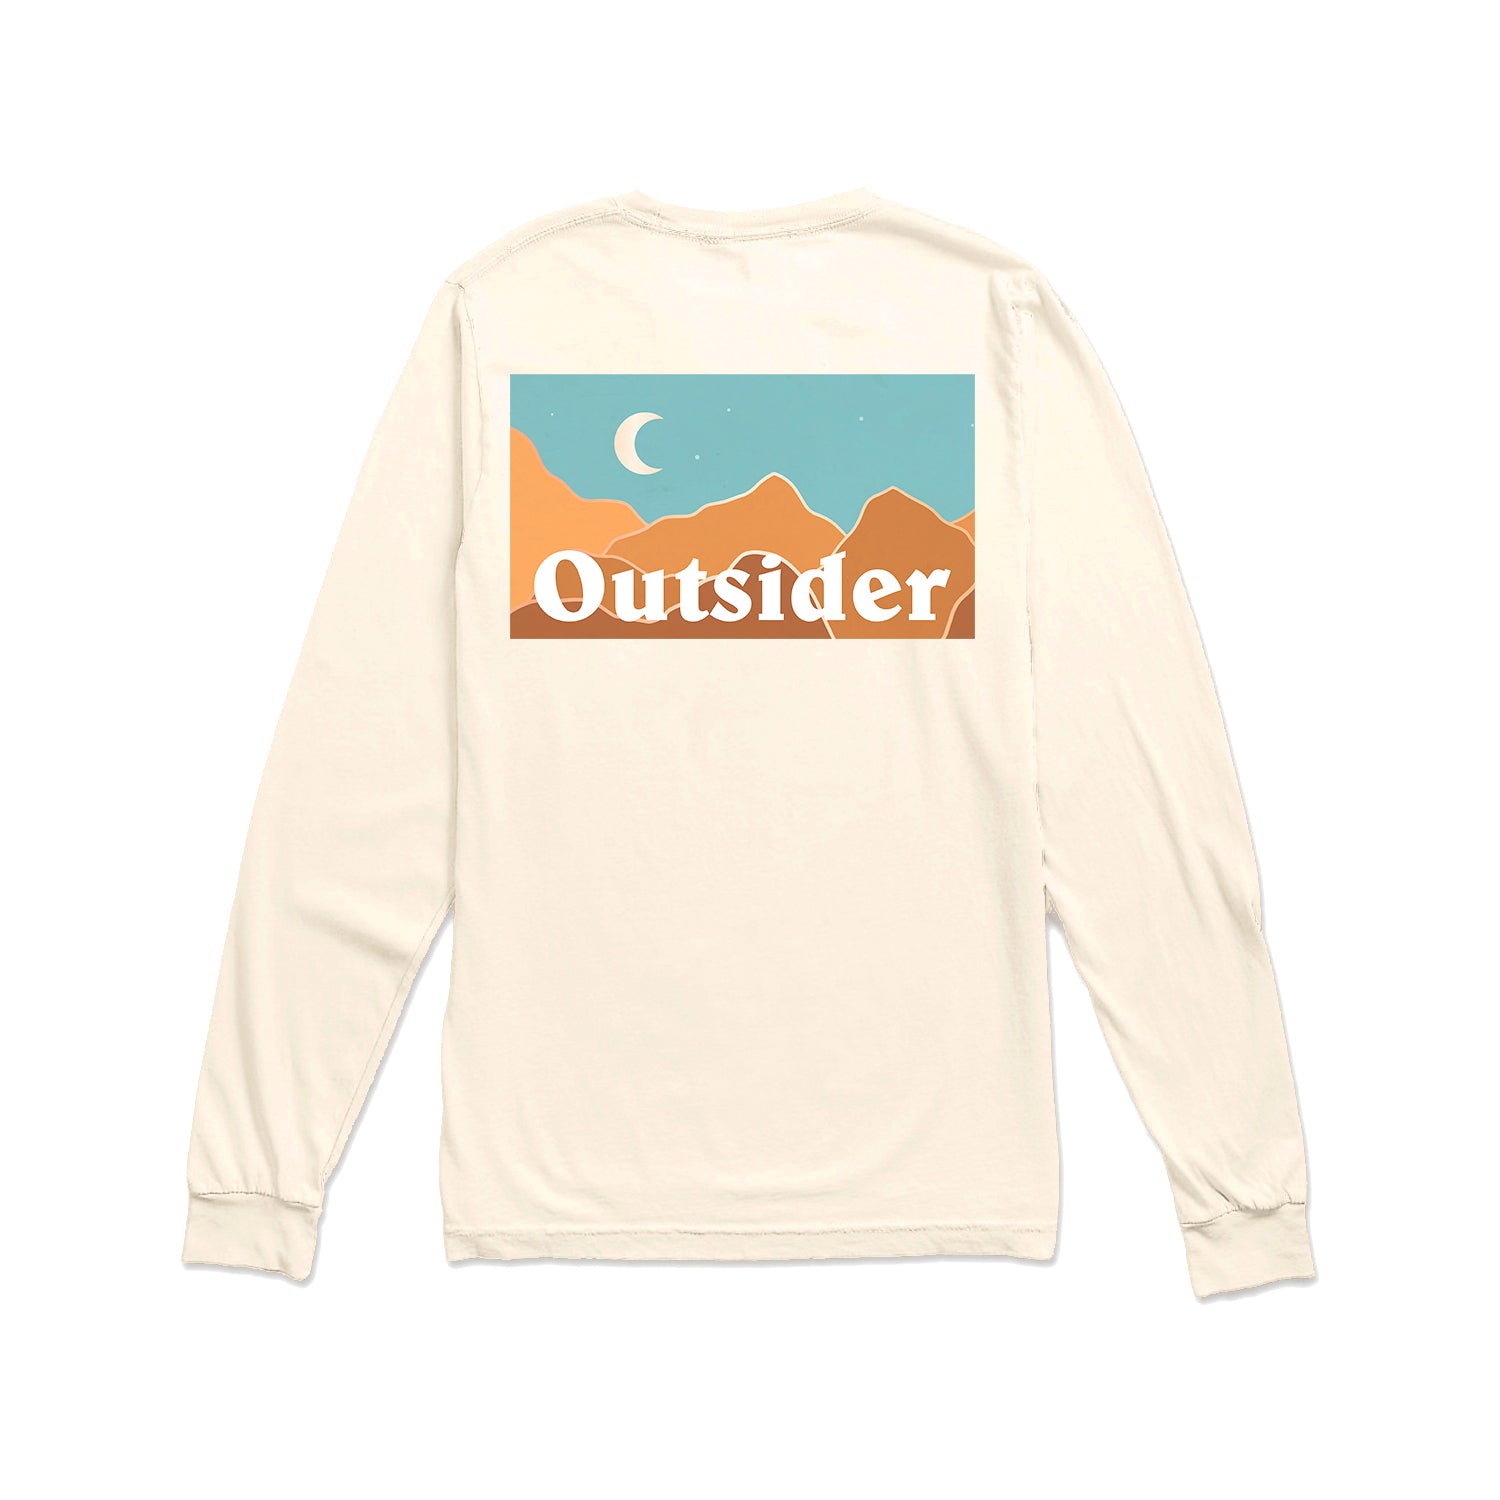 Of These Mountains Desert Outsider Long Sleeve Tee